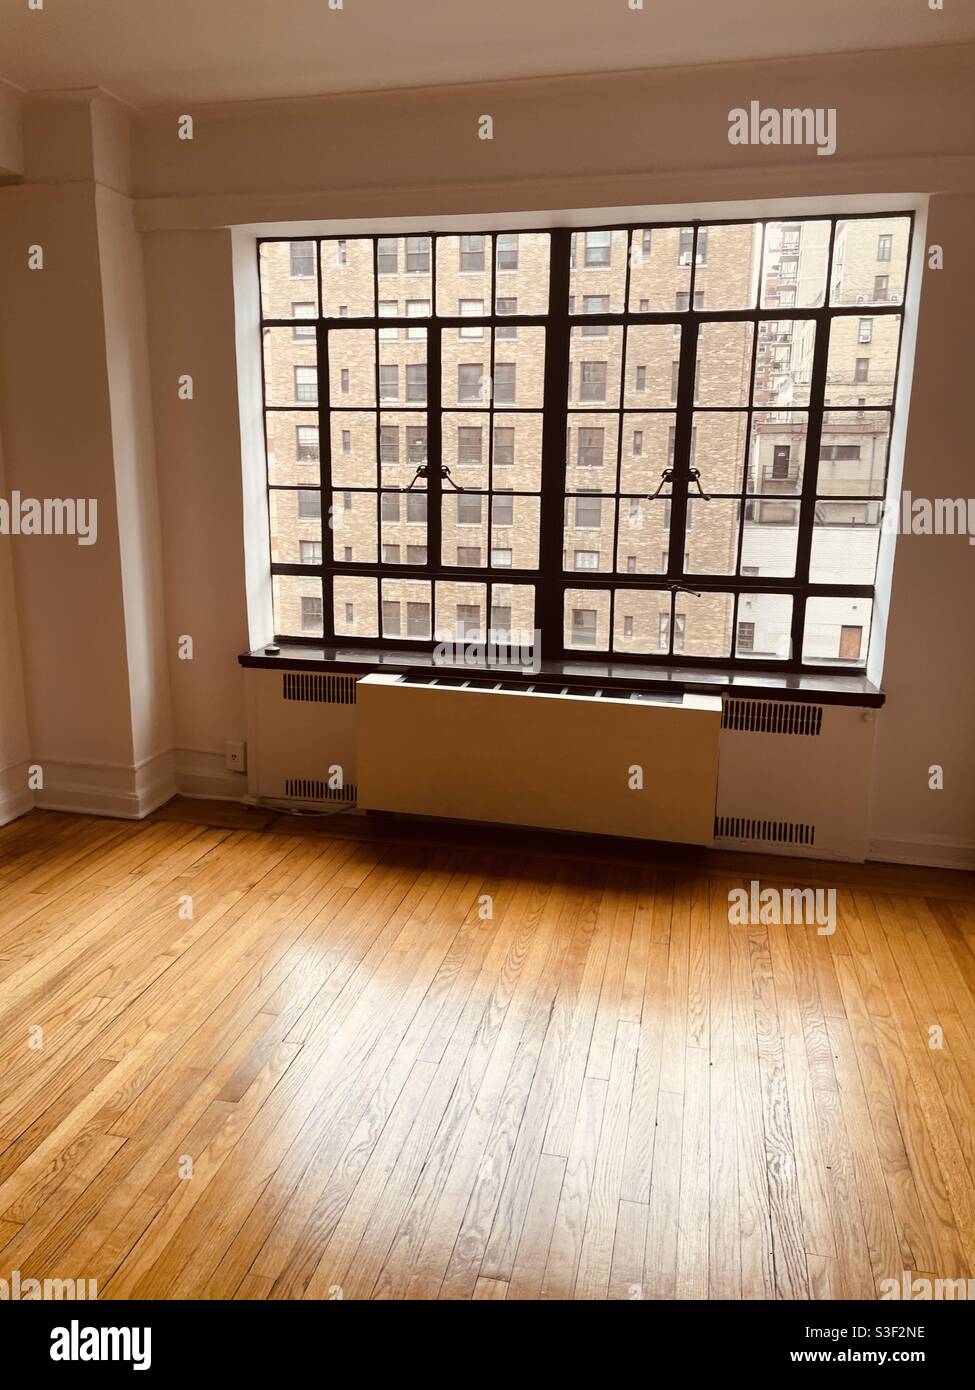 Beautiful wood floors and wrought iron window frames in an historic pre-war building Stock Photo